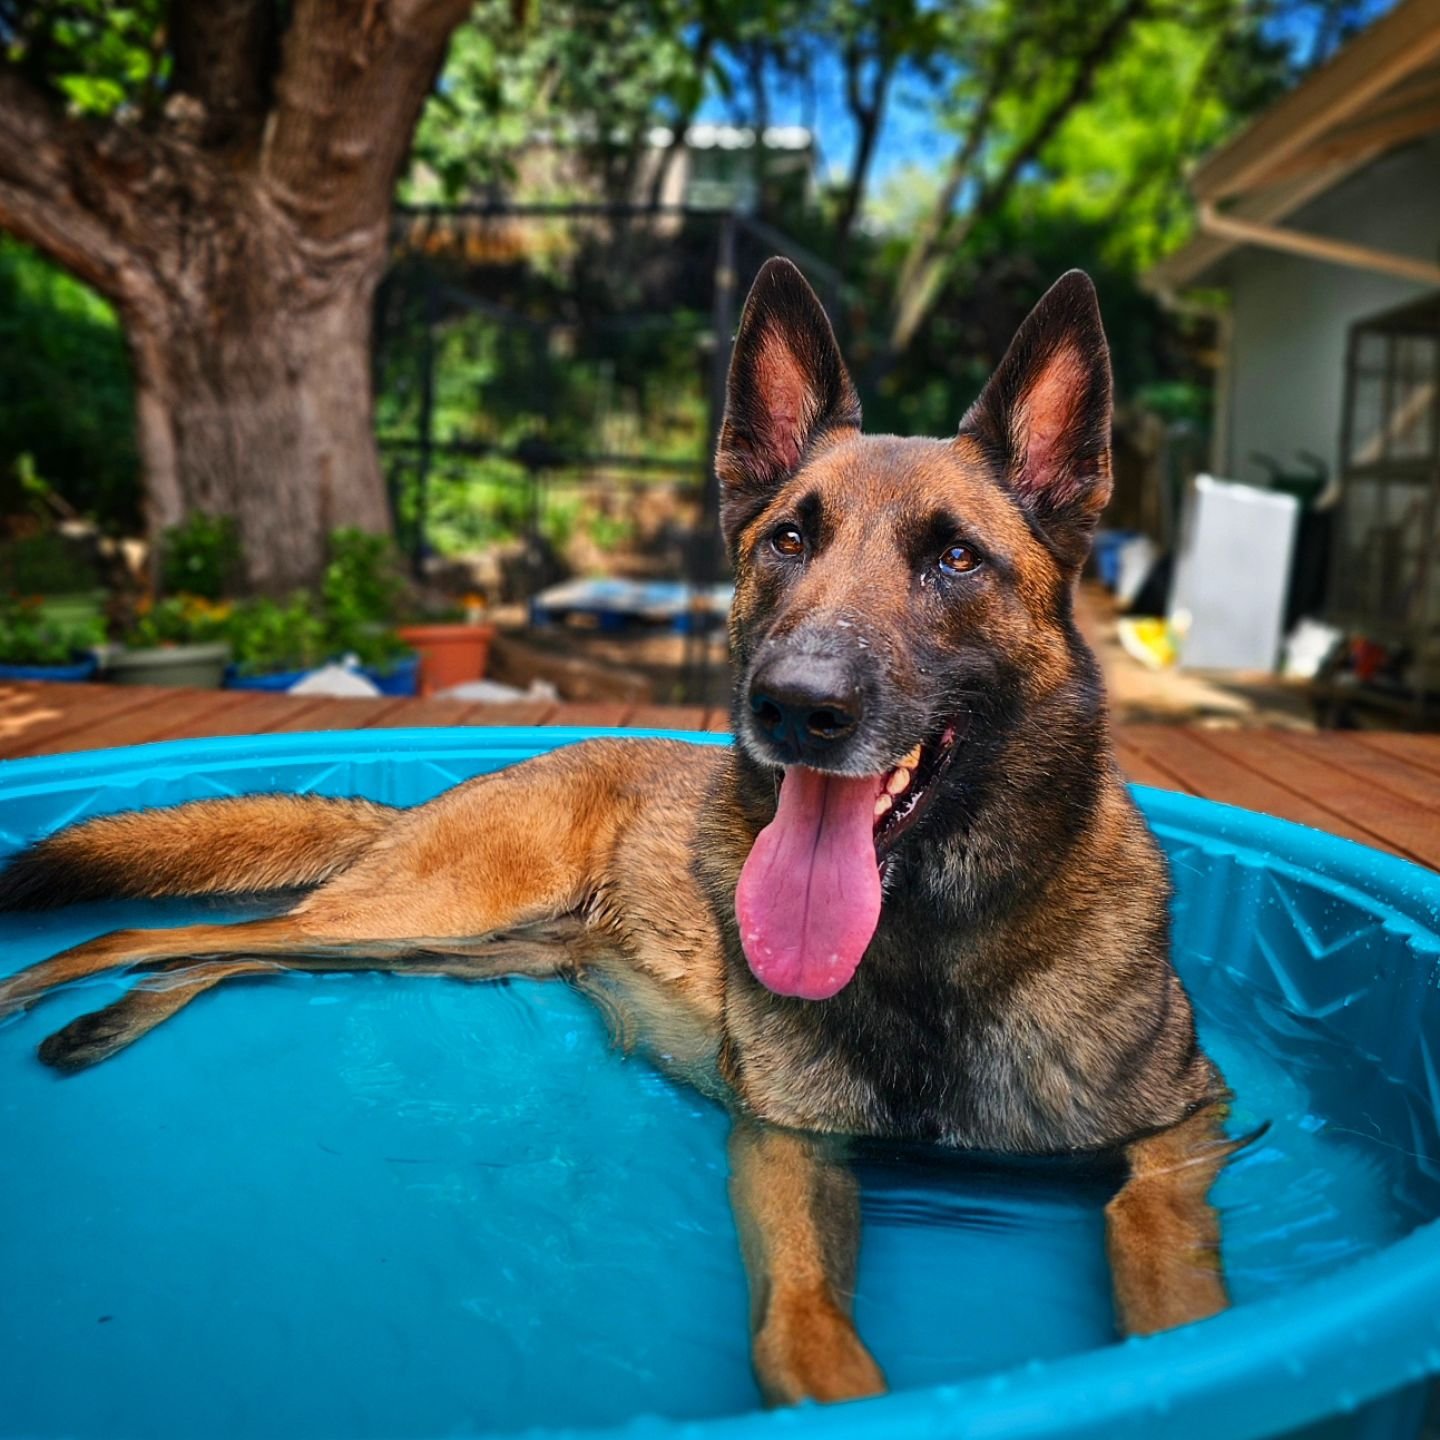 😎 We're ready for the summer heat! Are you?🌞
Have a summer vacation planned but can't take your dogs?

🐾 At JoBu Dog Company, we understand the importance of providing a safe, comfortable, and stimulating environment for your canine family members